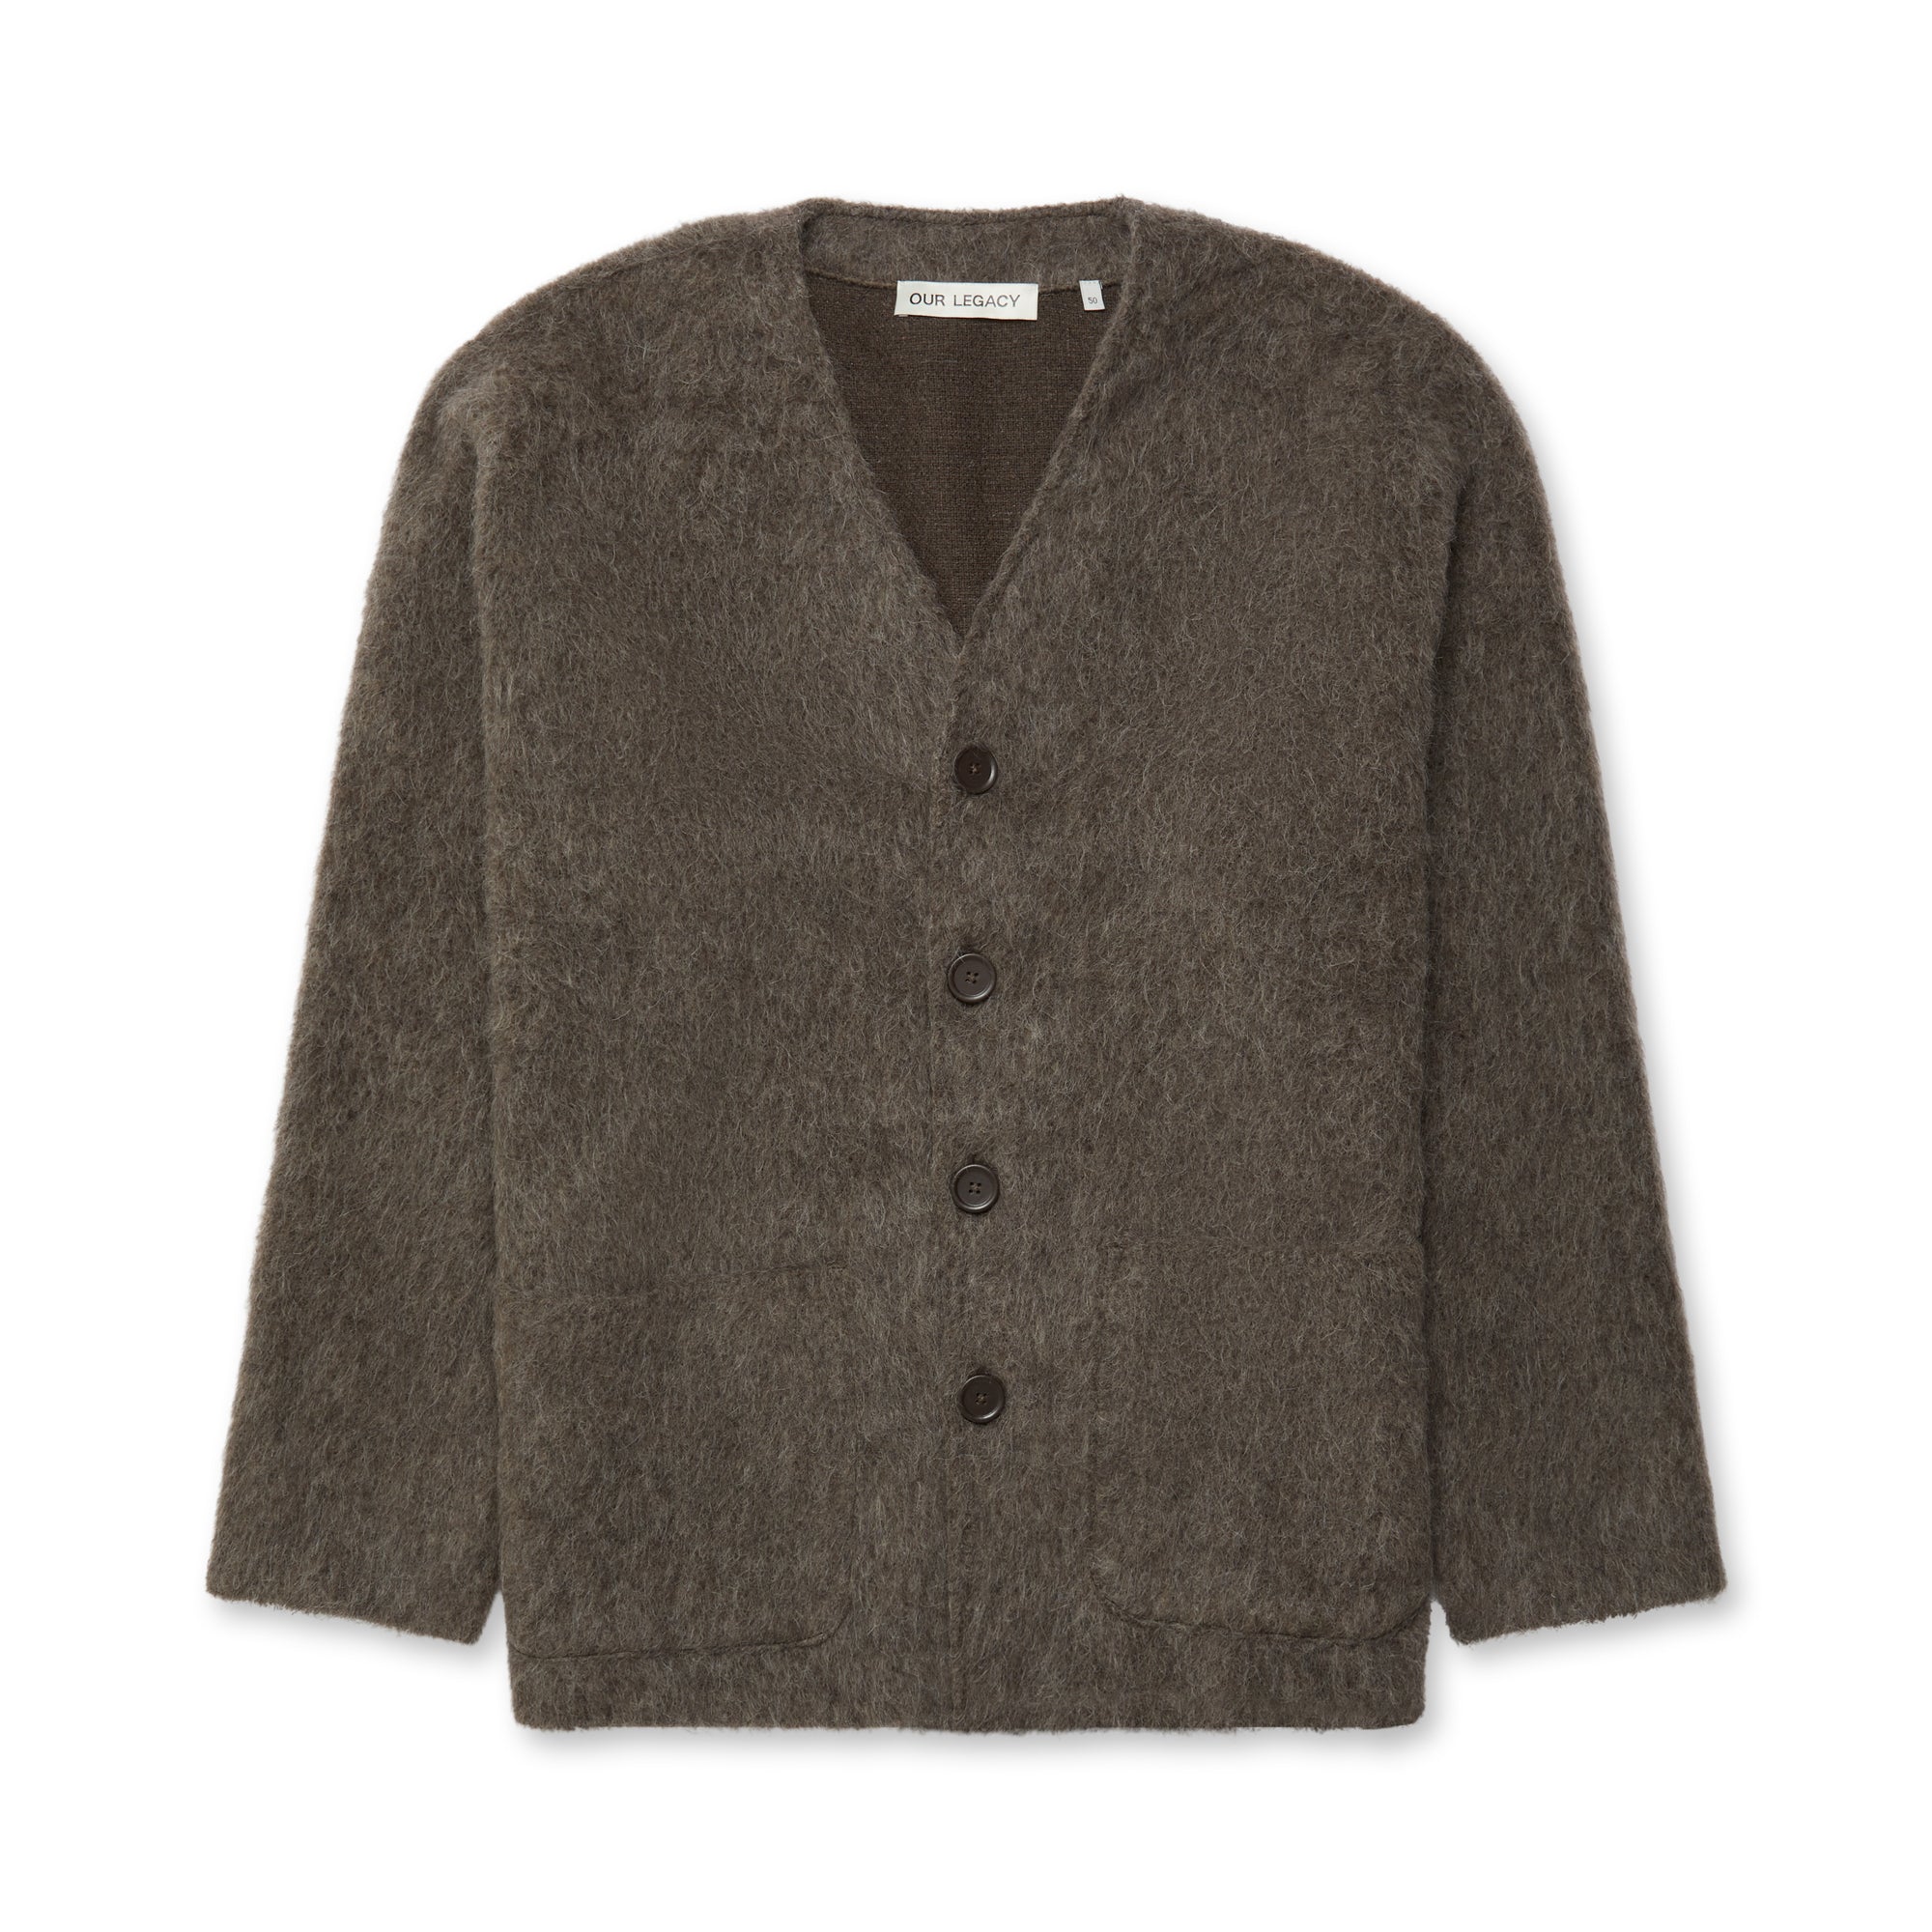 Our Legacy - Men’s Cardigan - (Grey) view 5